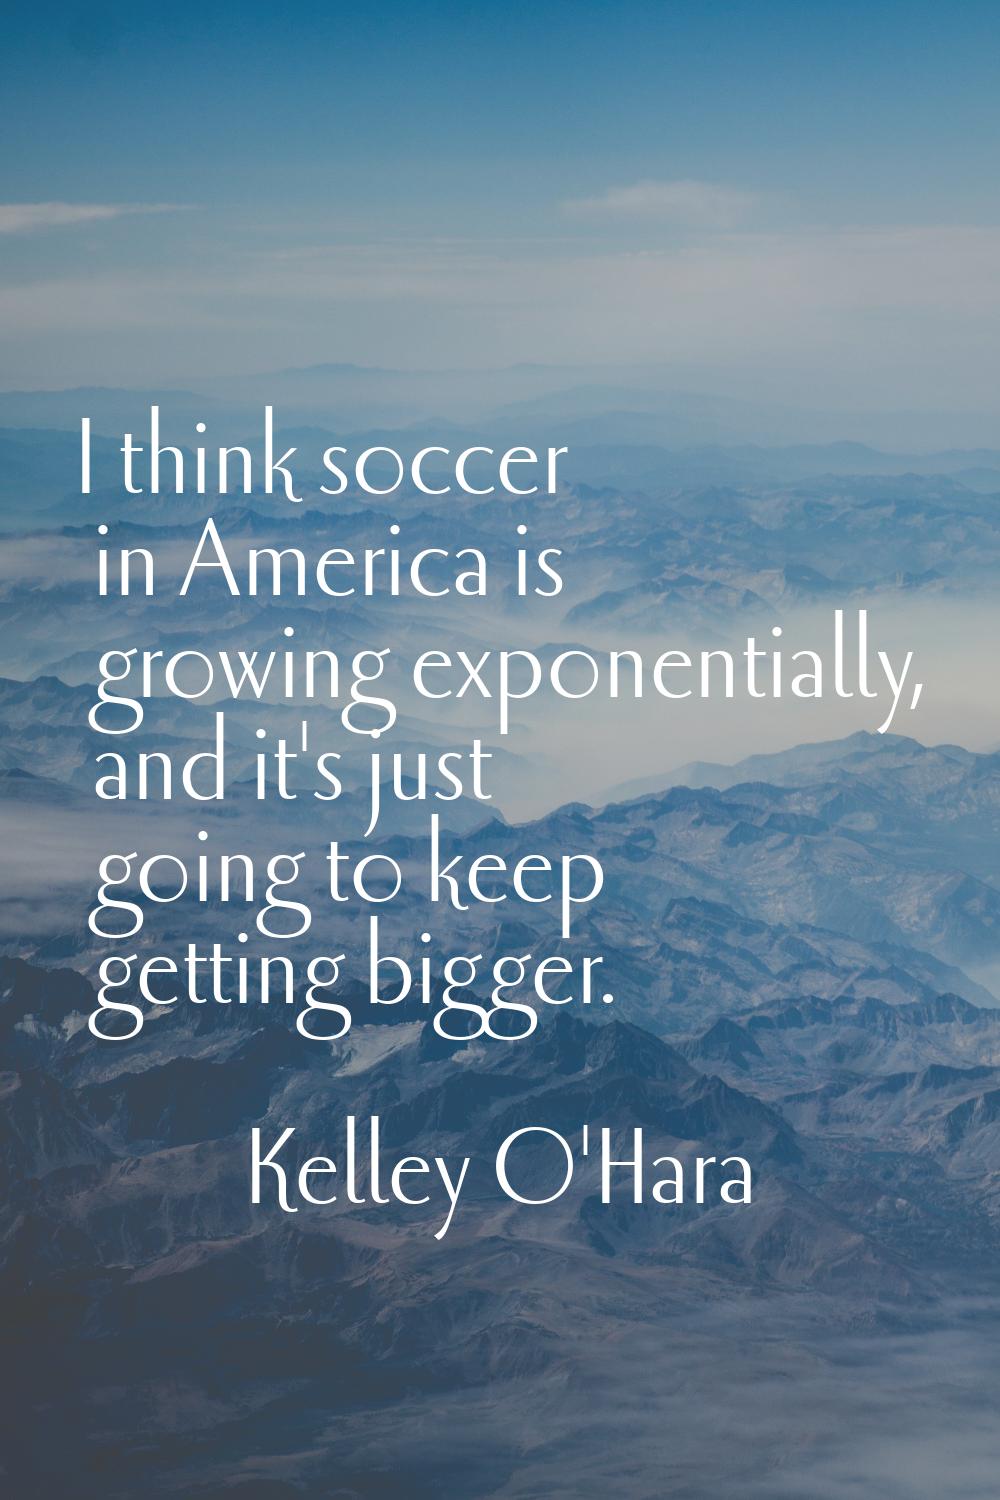 I think soccer in America is growing exponentially, and it's just going to keep getting bigger.